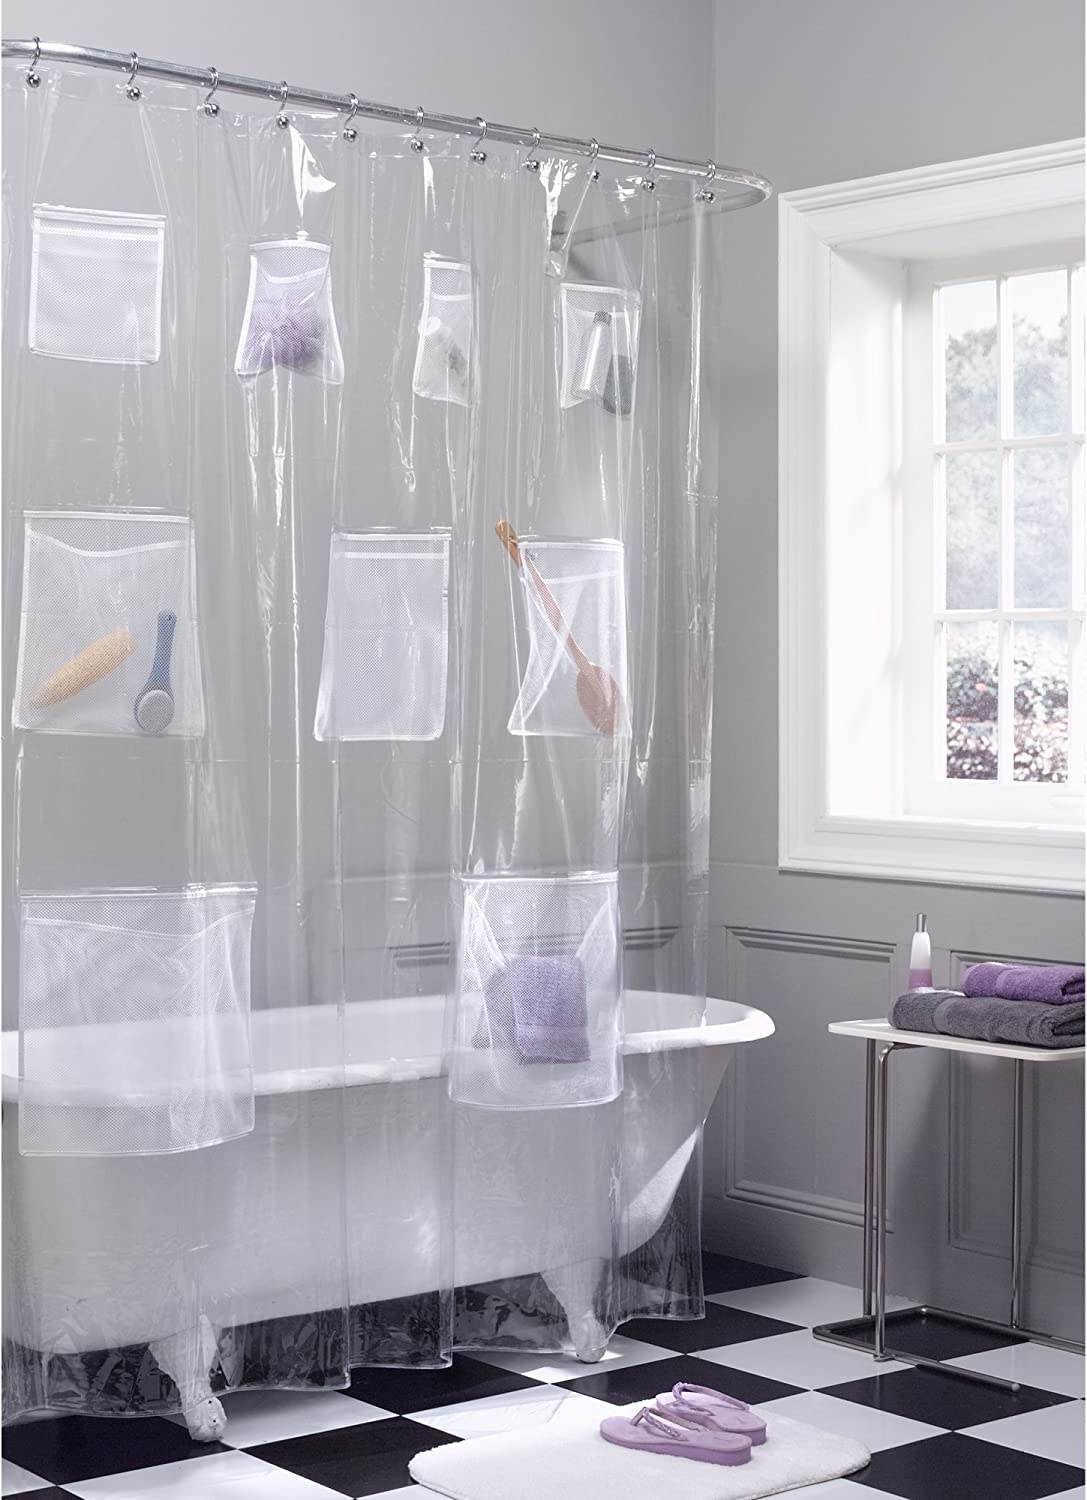 the transparent shower liner with products in the pockets